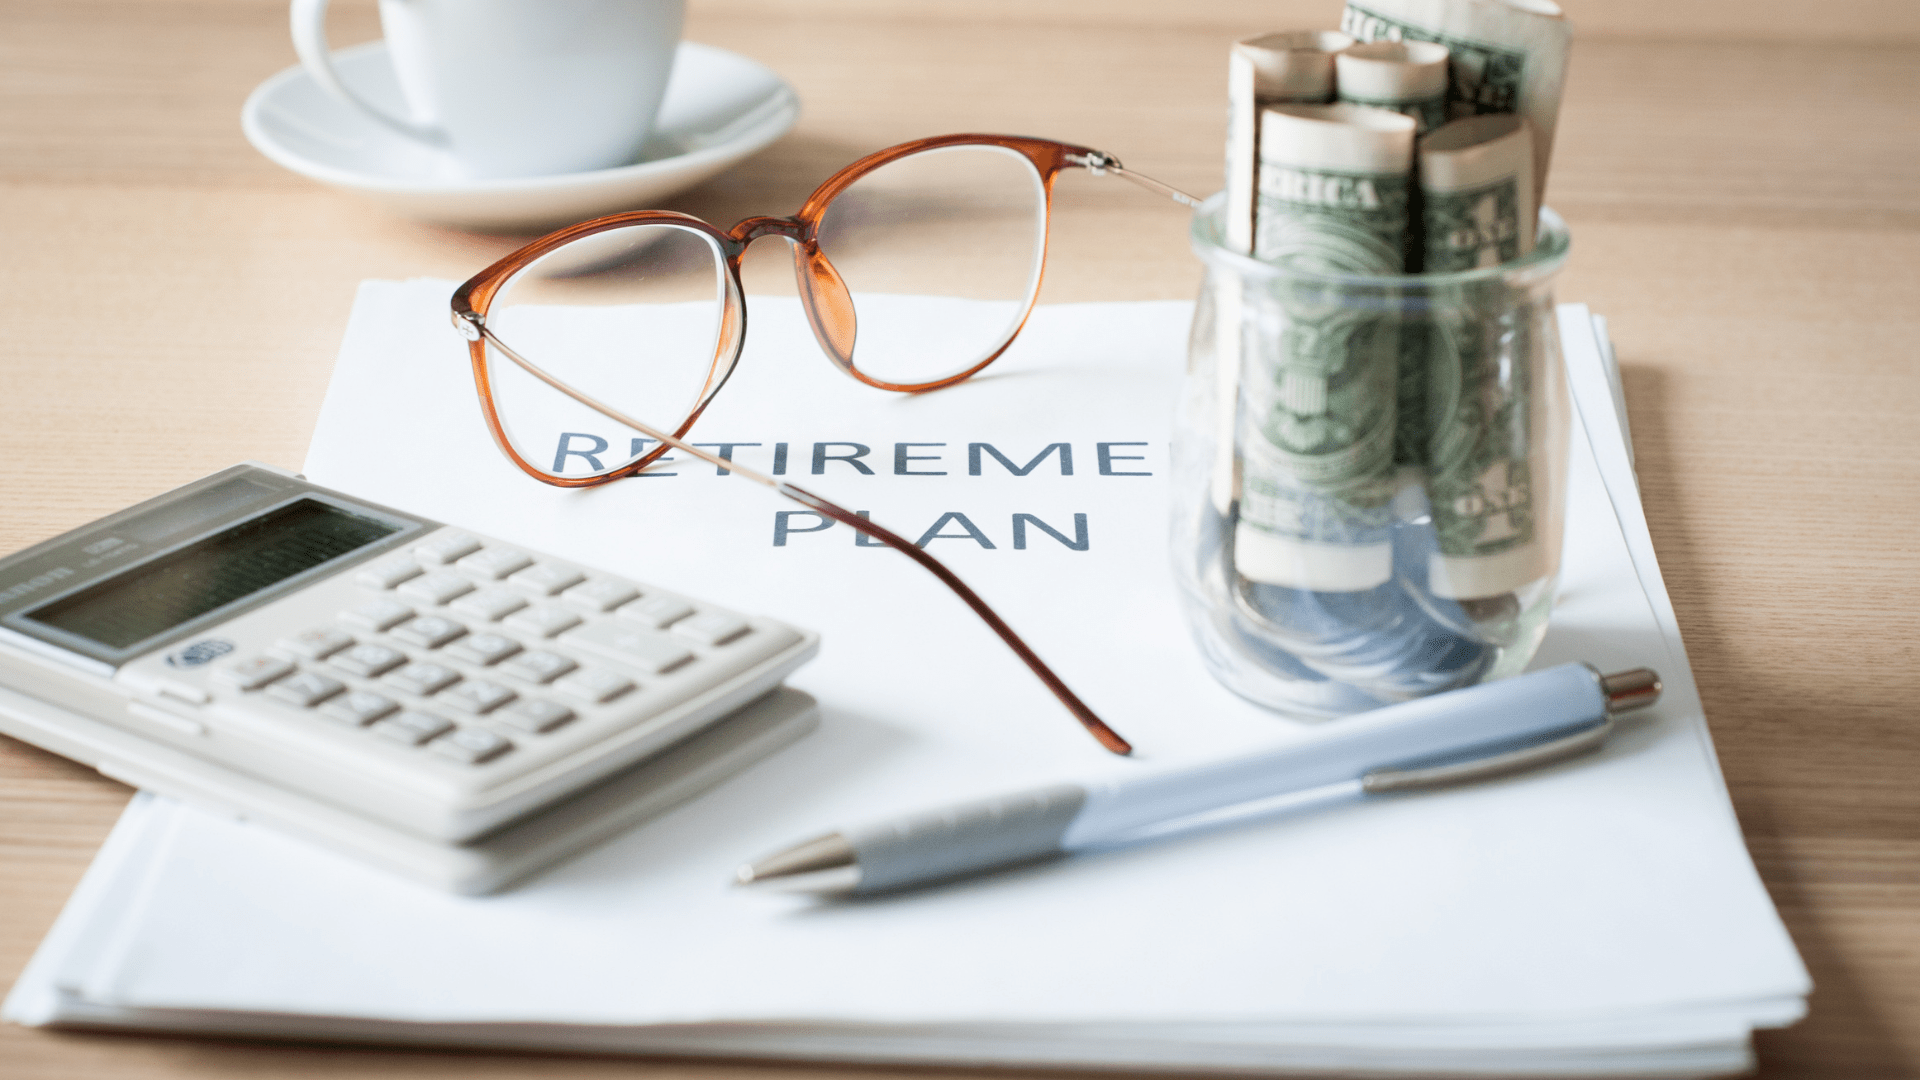 Packet of documents titled "Retirement Plan" on a desk with a calculator, glasses, coffee, and some collected cash.